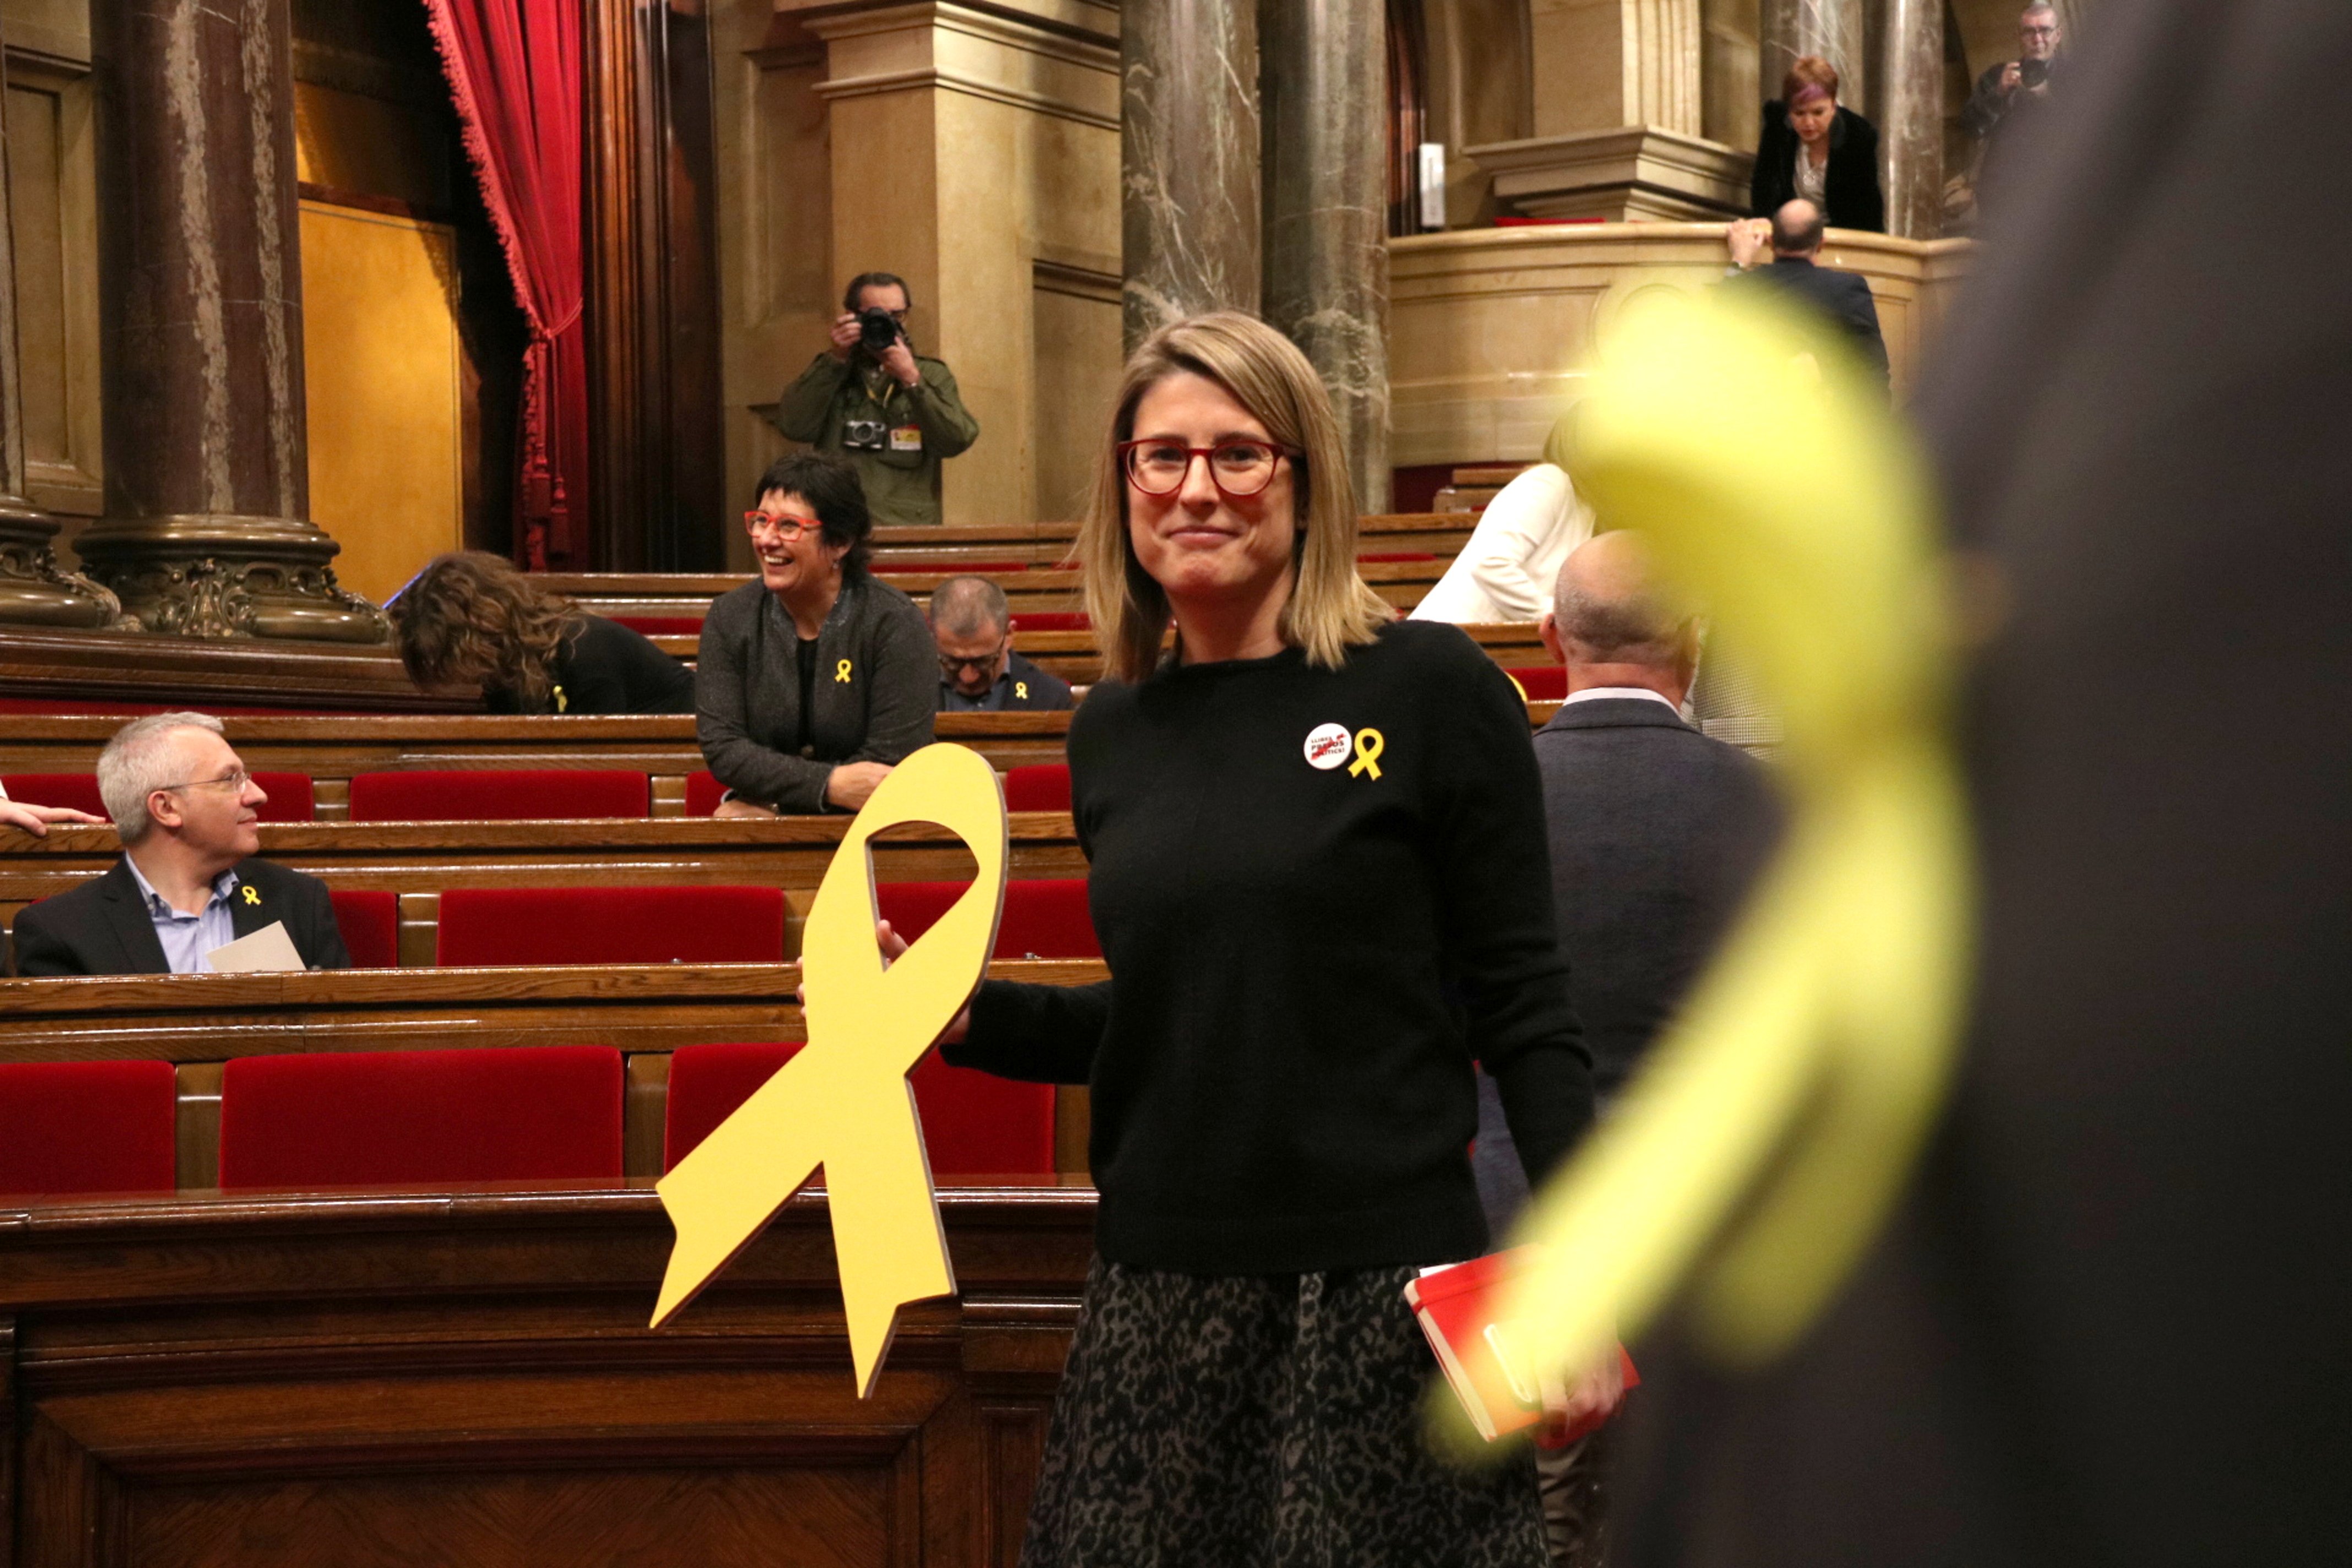 Sexist insults against Catalan politician Elsa Artadi cause wave of protests